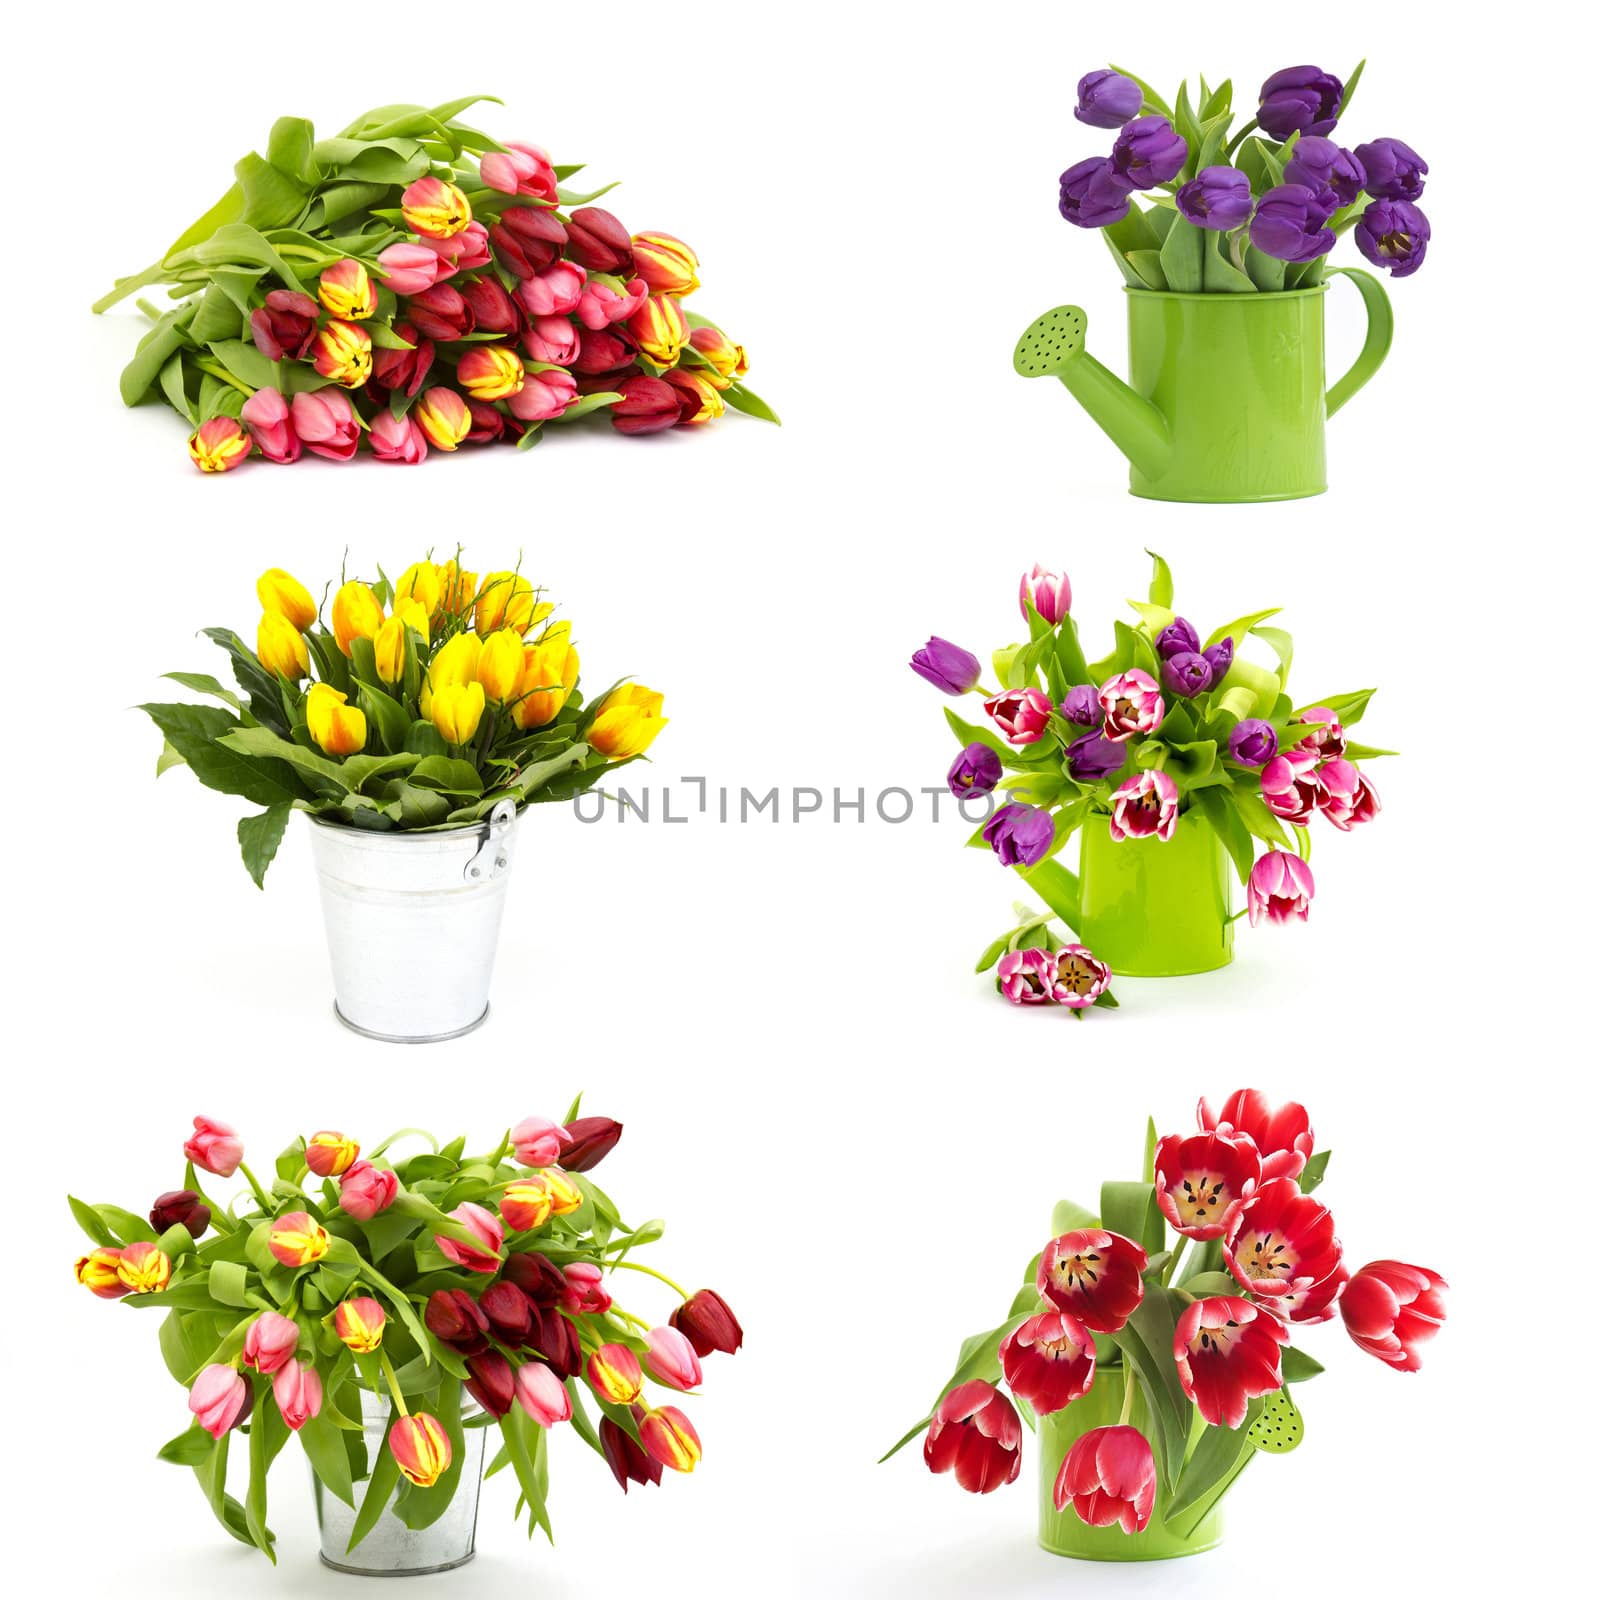 colourful tulips - collage